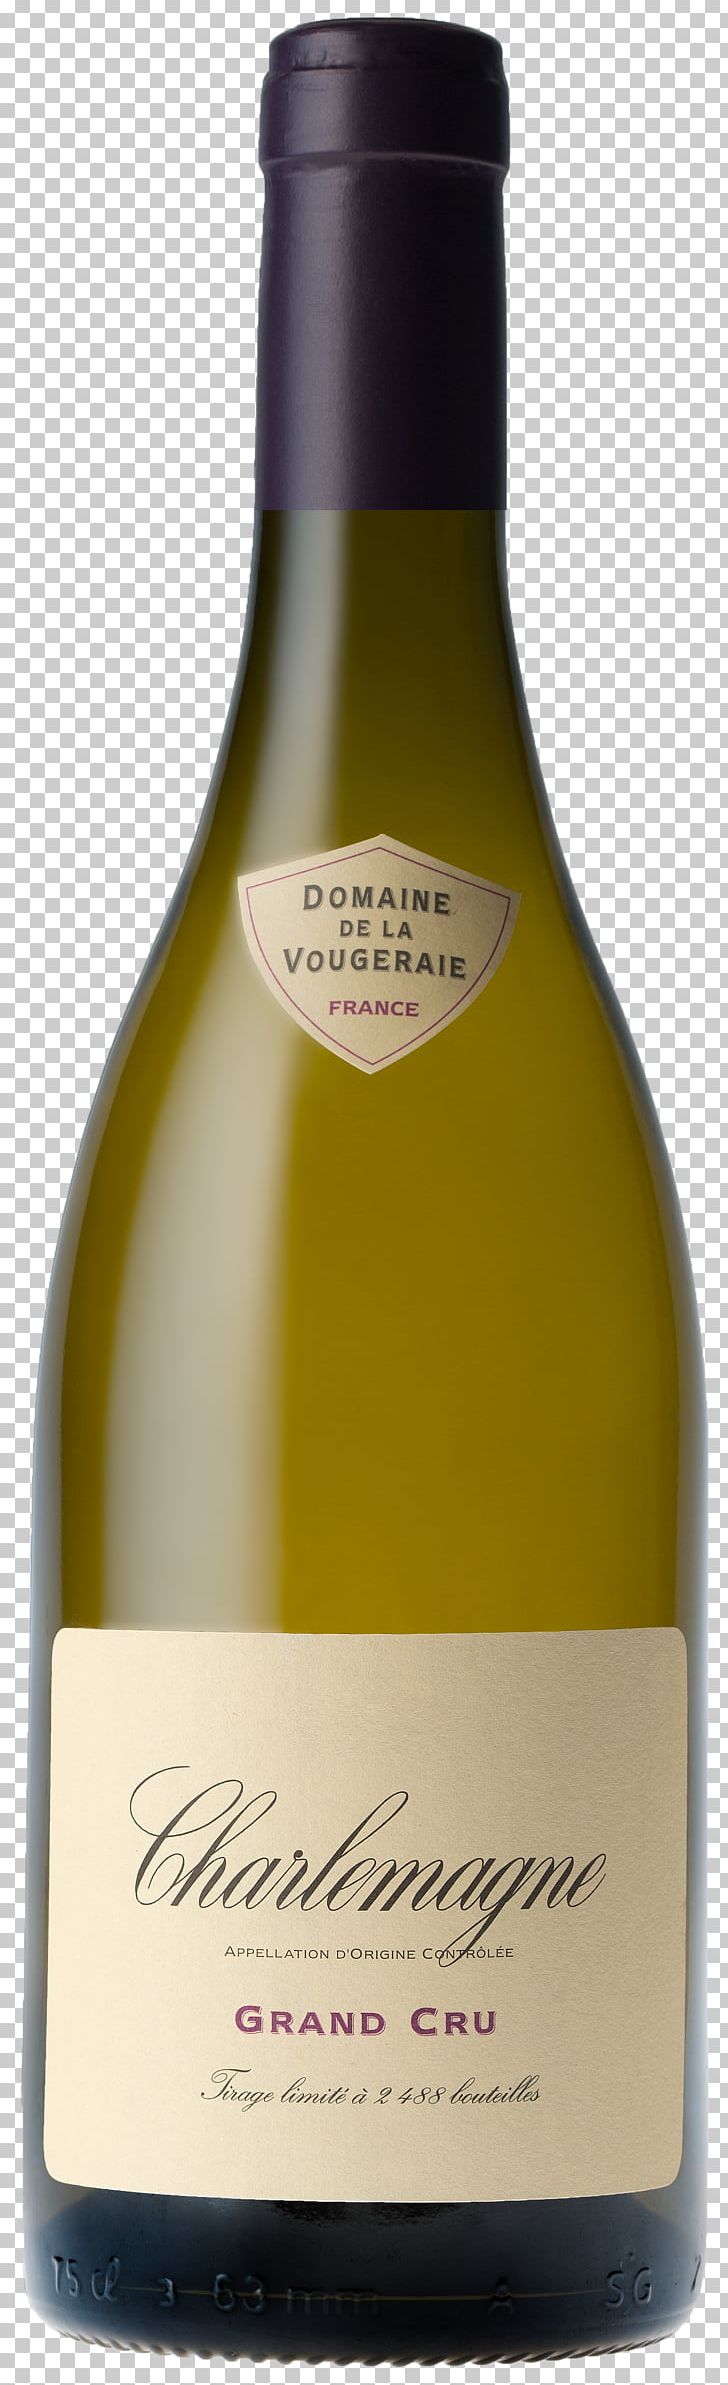 White Wine Common Grape Vine Chardonnay Burgundy Wine PNG, Clipart, Alcoholic Beverage, Alcoholic Drink, Bottle, Burgundy Wine, Champagne Free PNG Download